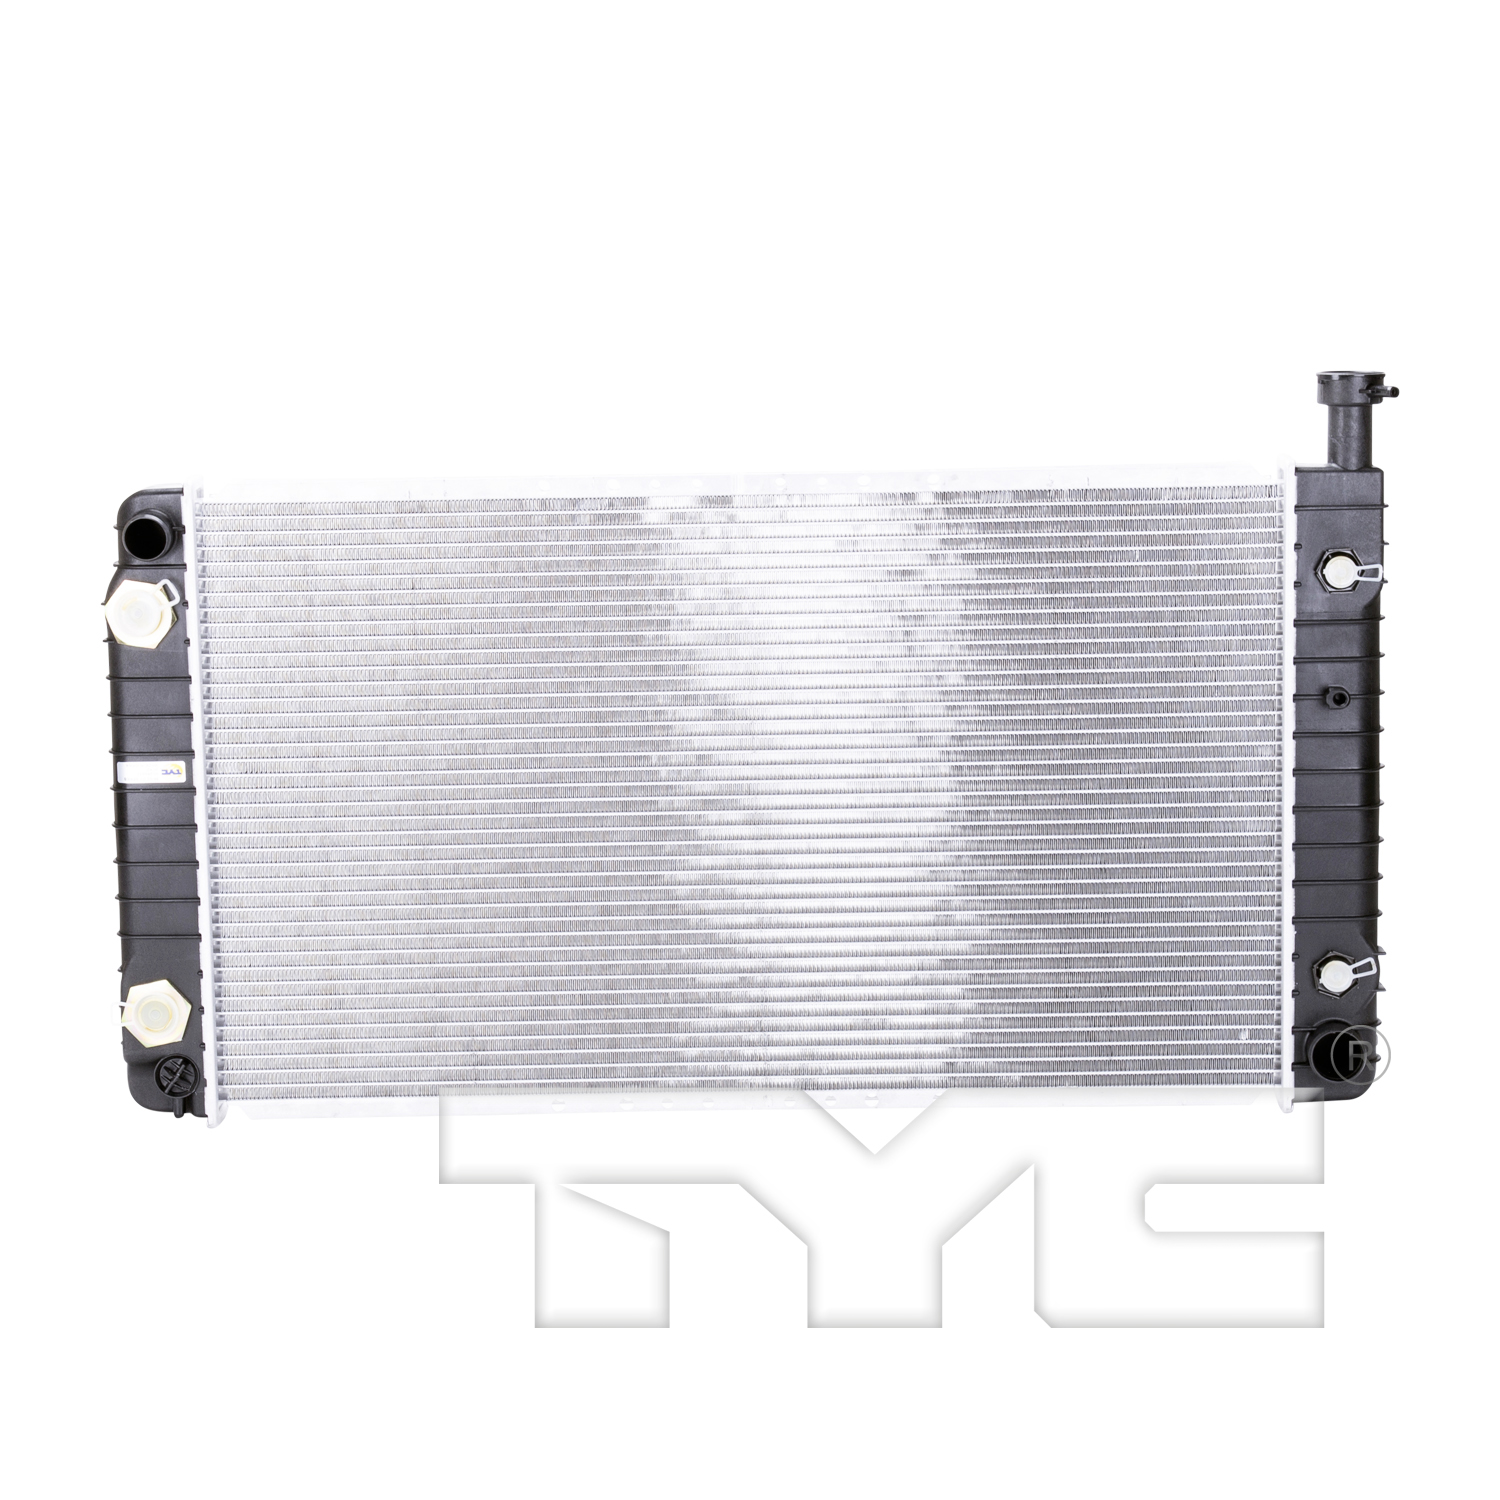 Aftermarket RADIATORS for CHEVROLET - EXPRESS 3500, EXPRESS 3500,97-02,Radiator assembly